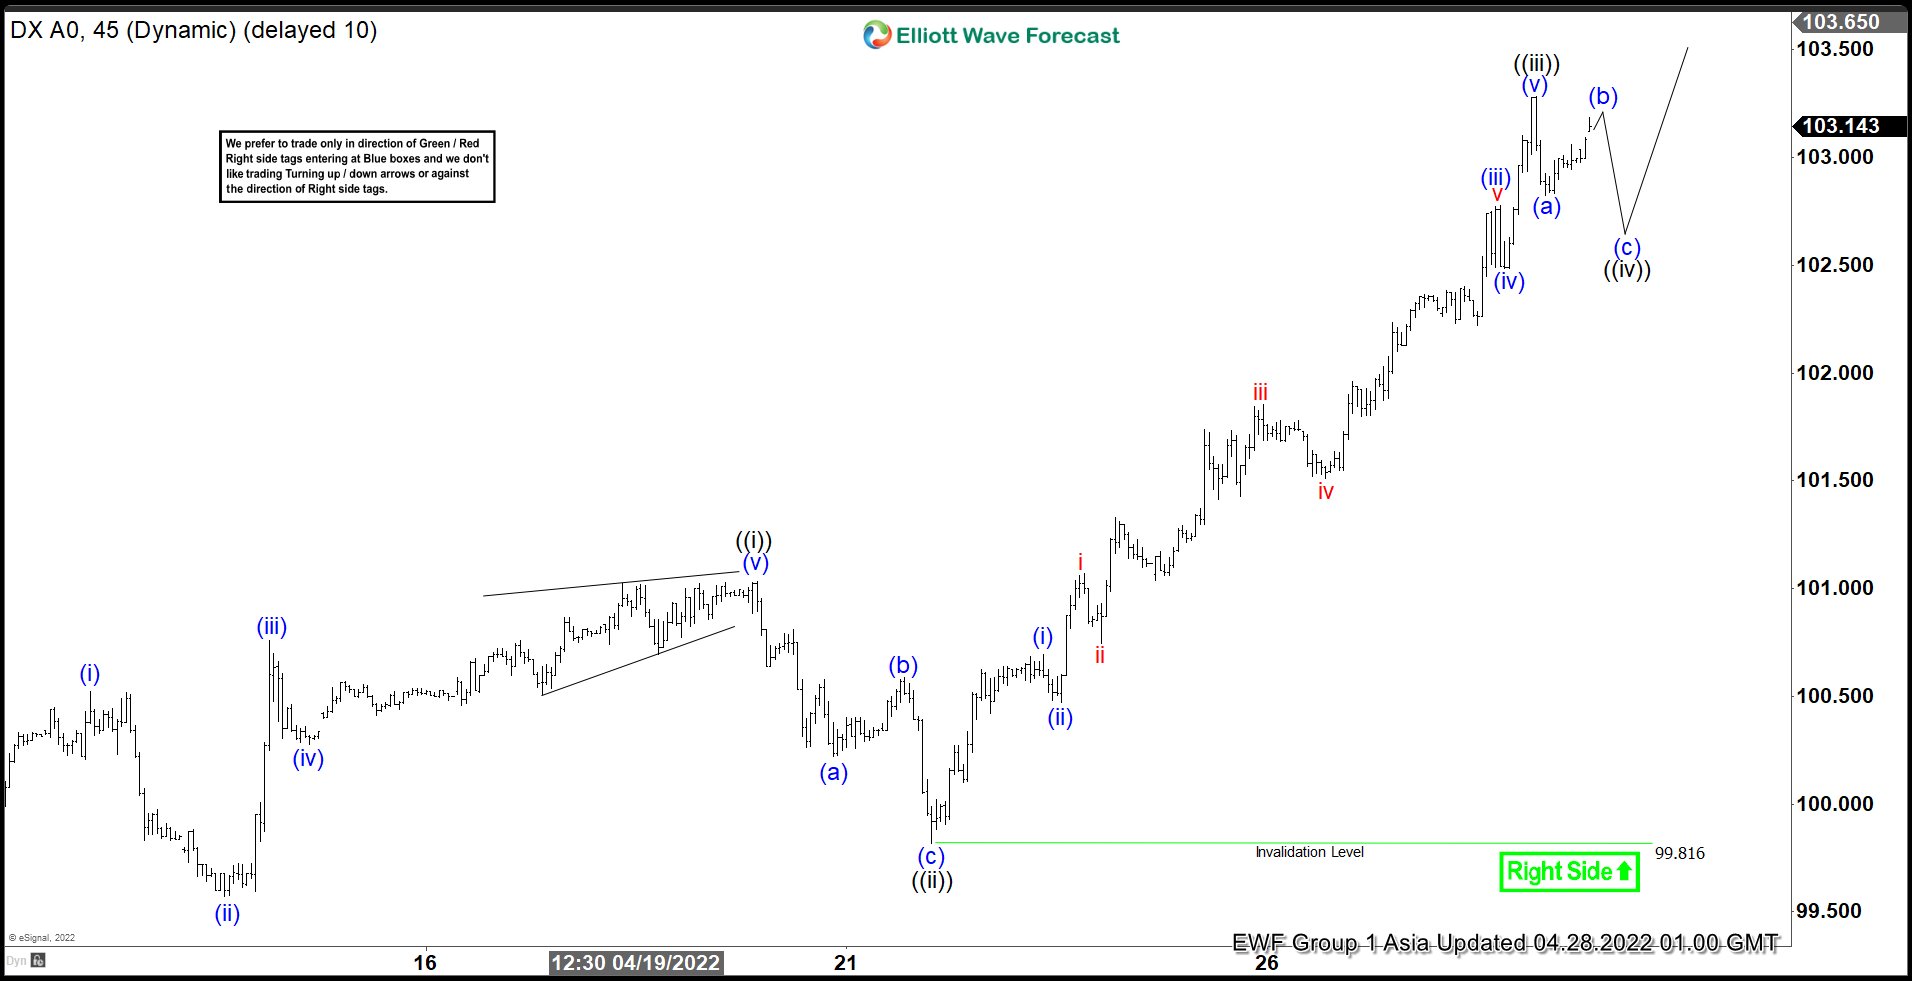 Elliott Wave View: Dollar Index (DXY) Should Continue to Extend Higher